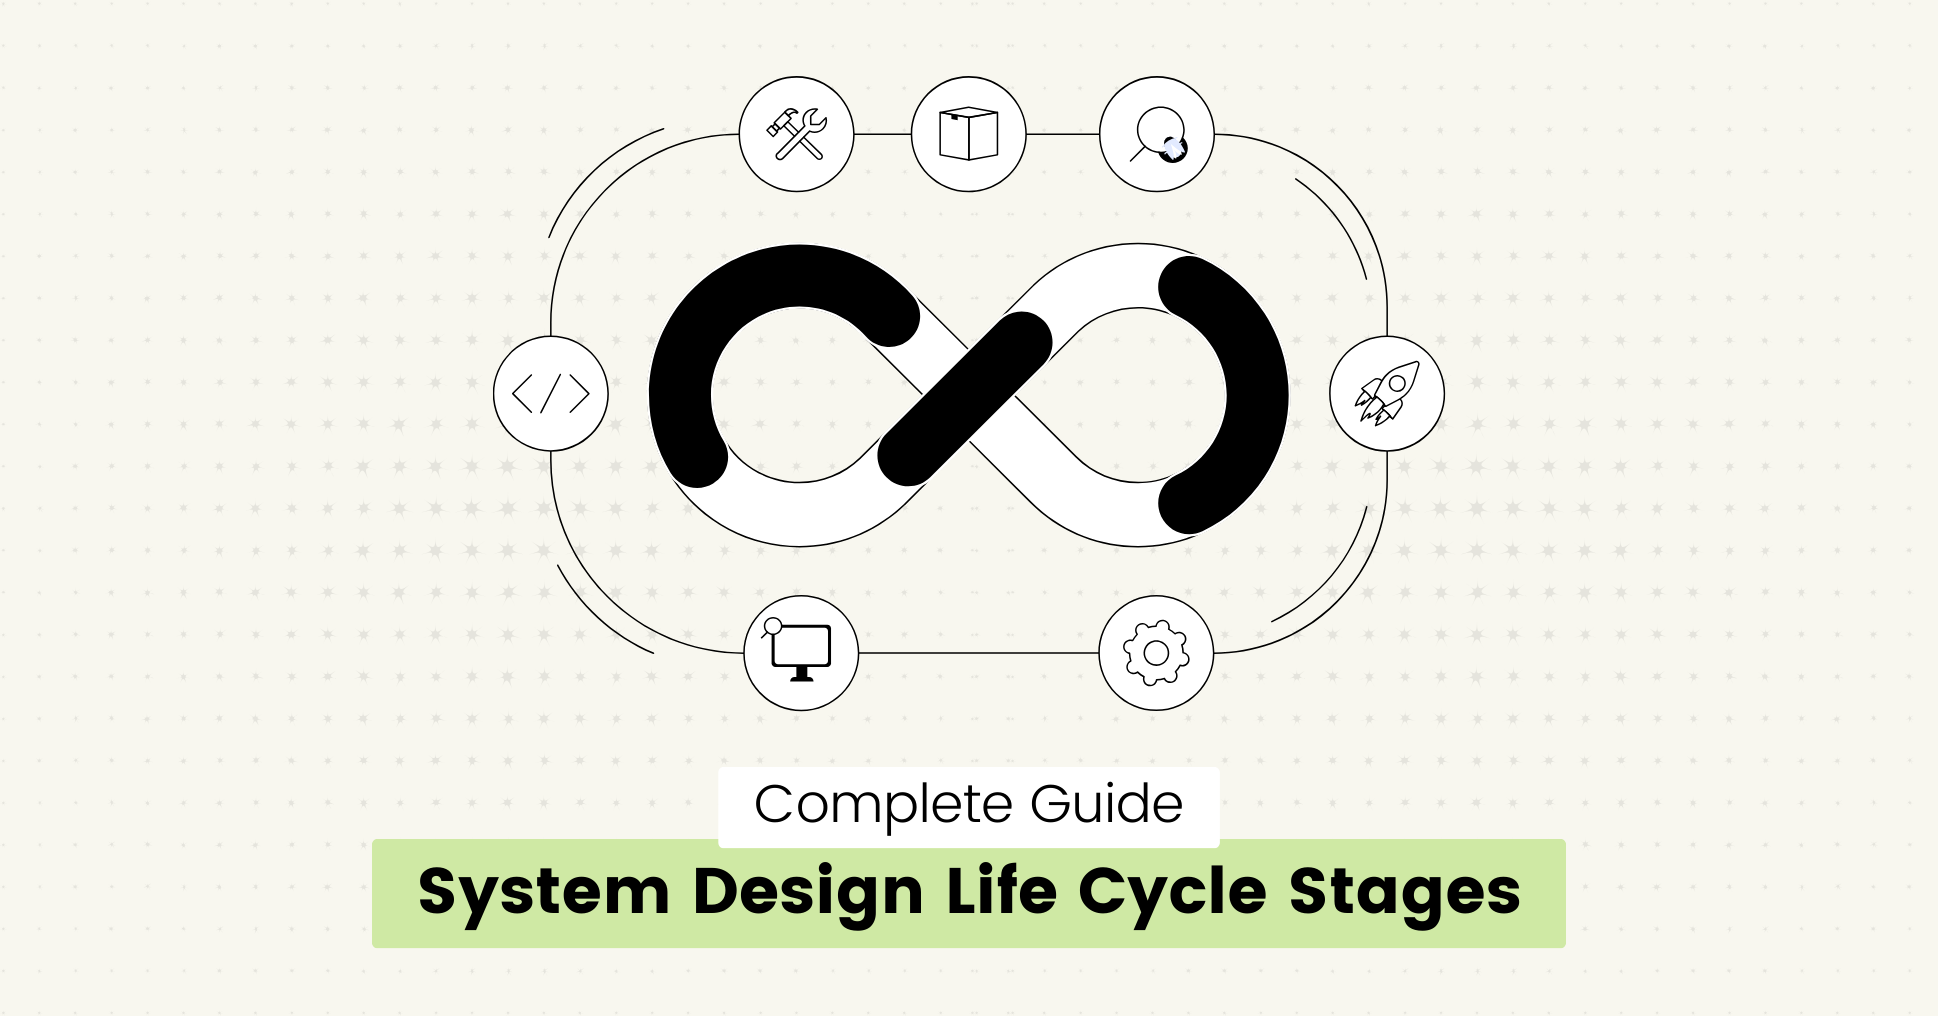 System Design Life Cycle Stages